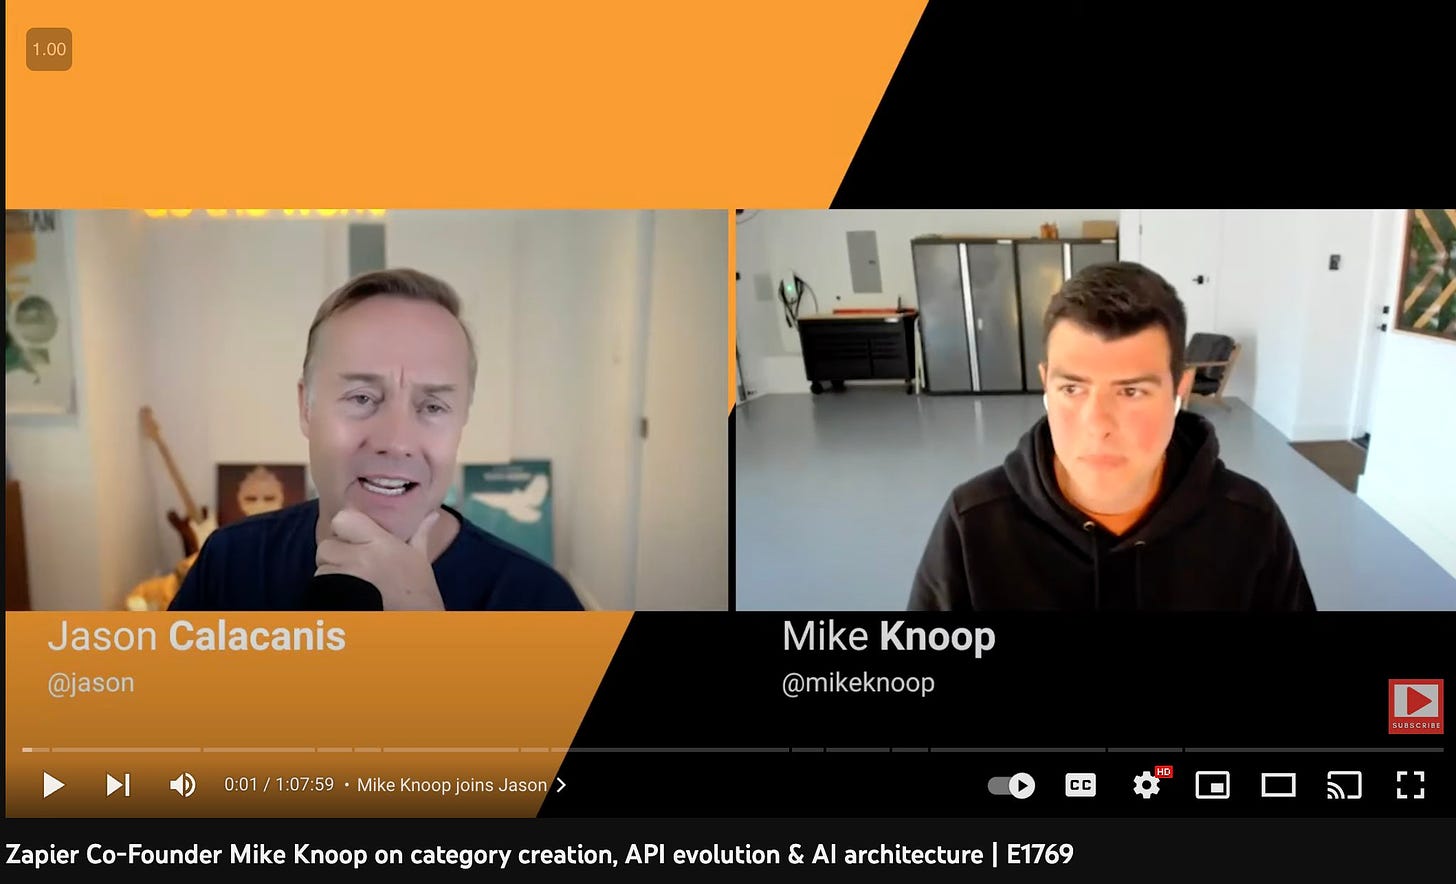 May be an image of 2 people and text that says ".00 Jason Calacanis @jason A Mike Knoop @mikeknoop 0:01/1:07:59 Mike Knoop joins Jasor Zapier Co-Founder Mike Knoop on category creation, API evolution & AI architecture E1769 SUBSCRIBE"